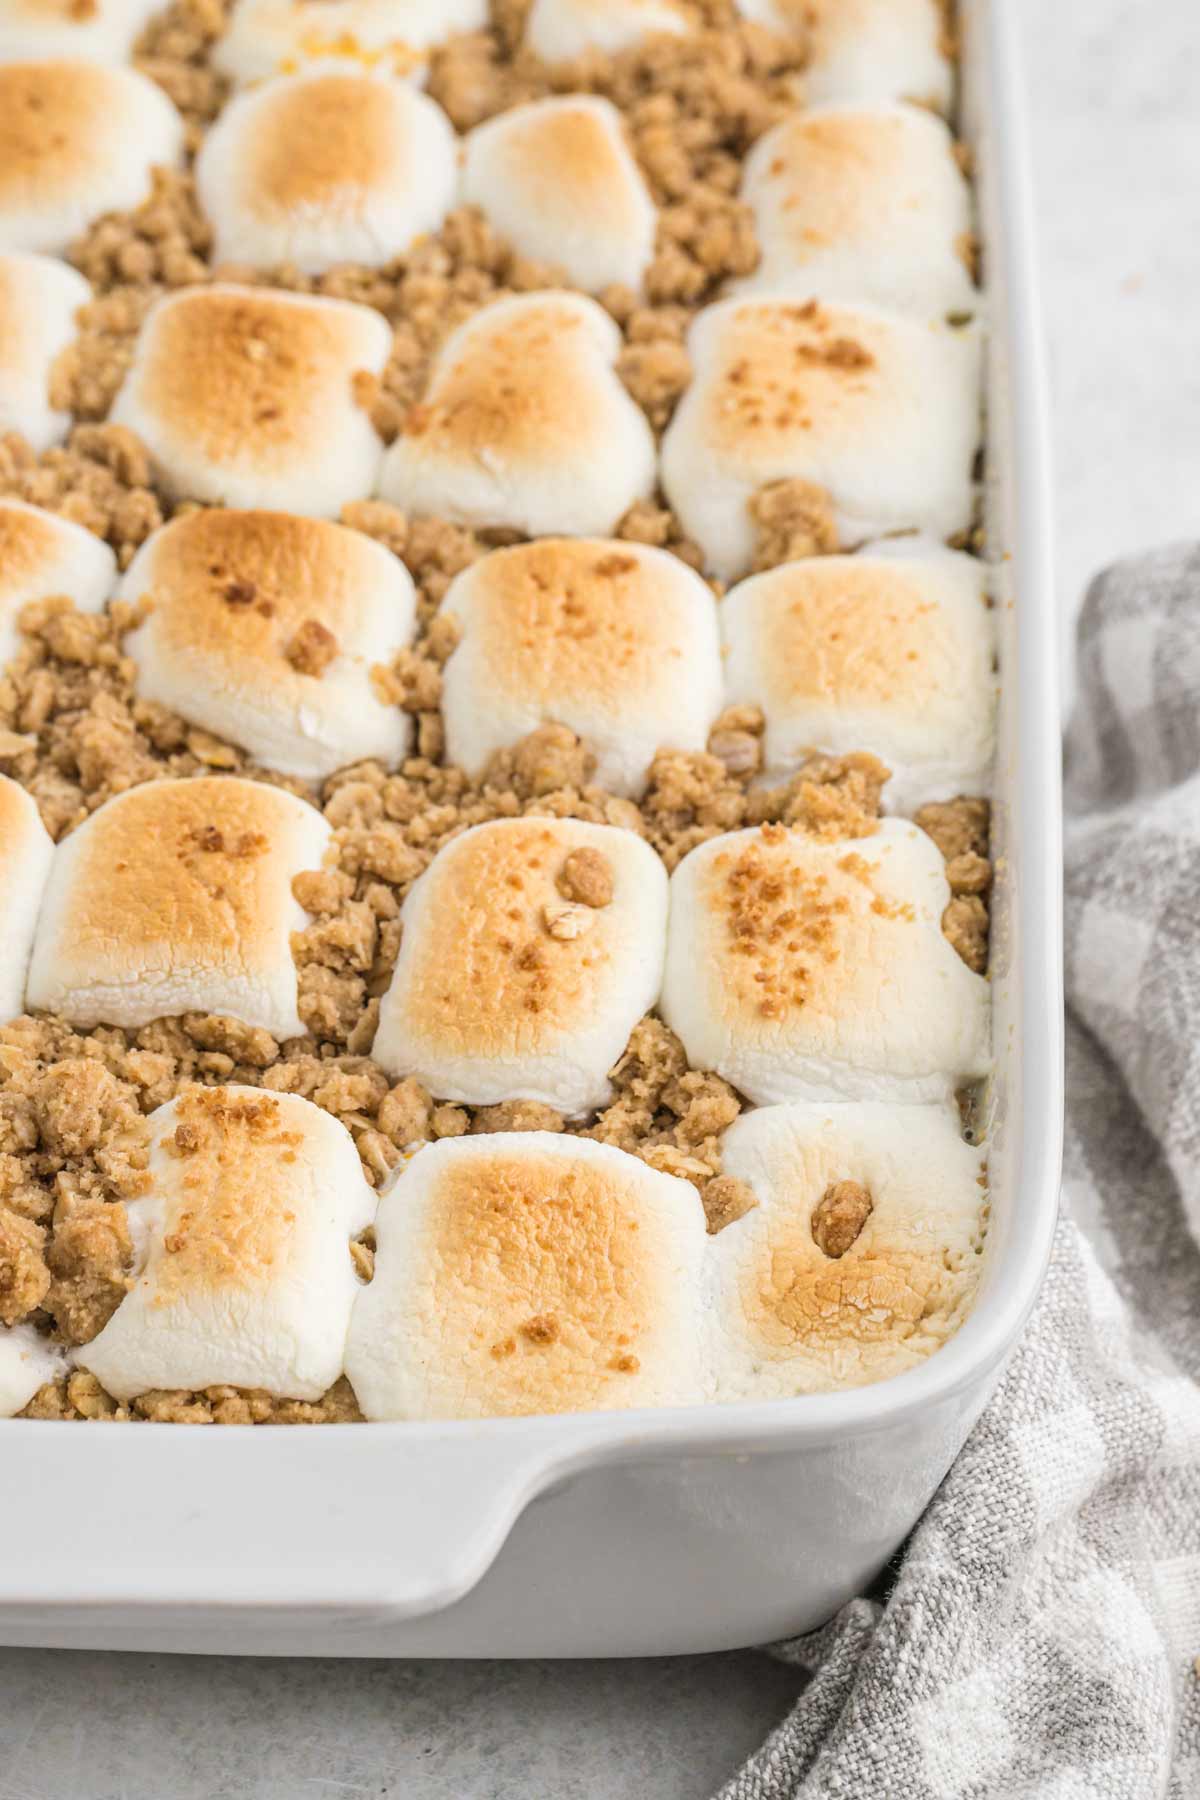 Sweet potato casserole topped with toasted marshmallows fresh out of the oven.